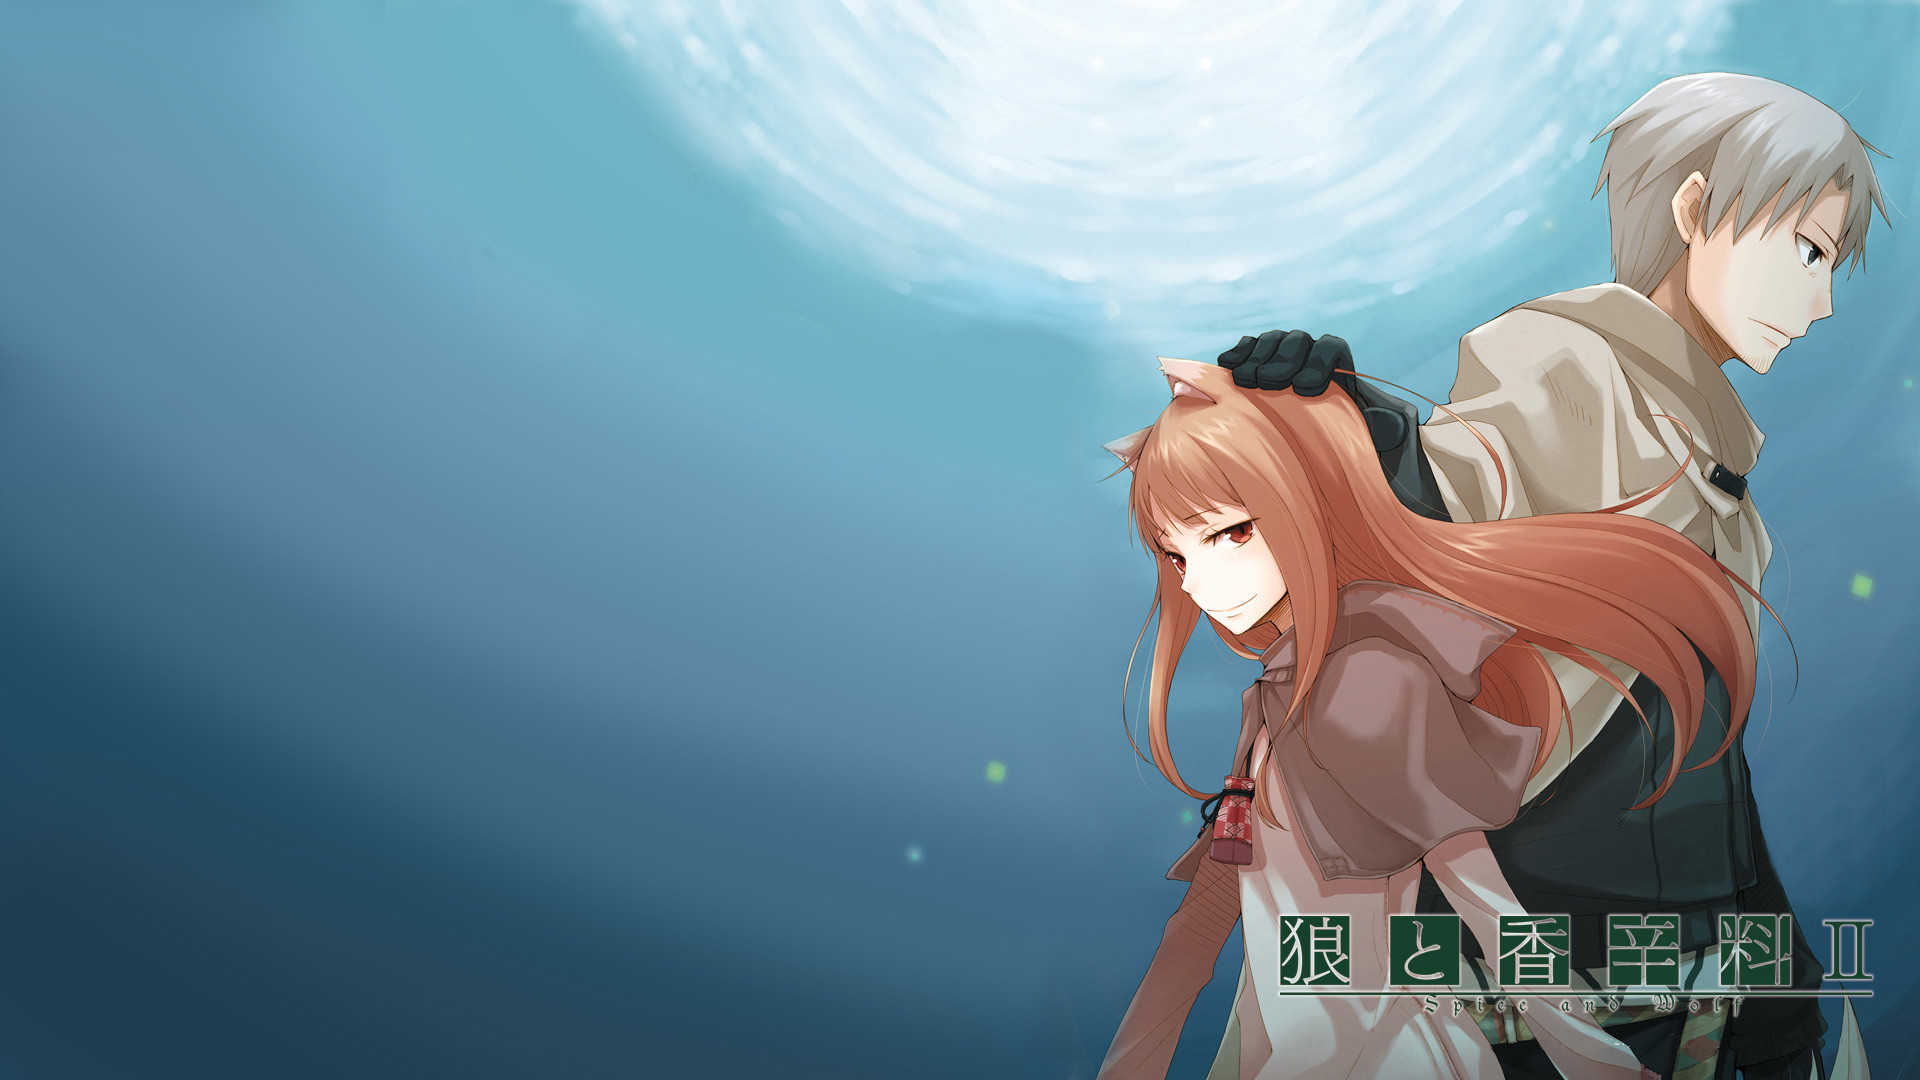 Spice And Wolf Wallpapers, Hintergrnde ID177339